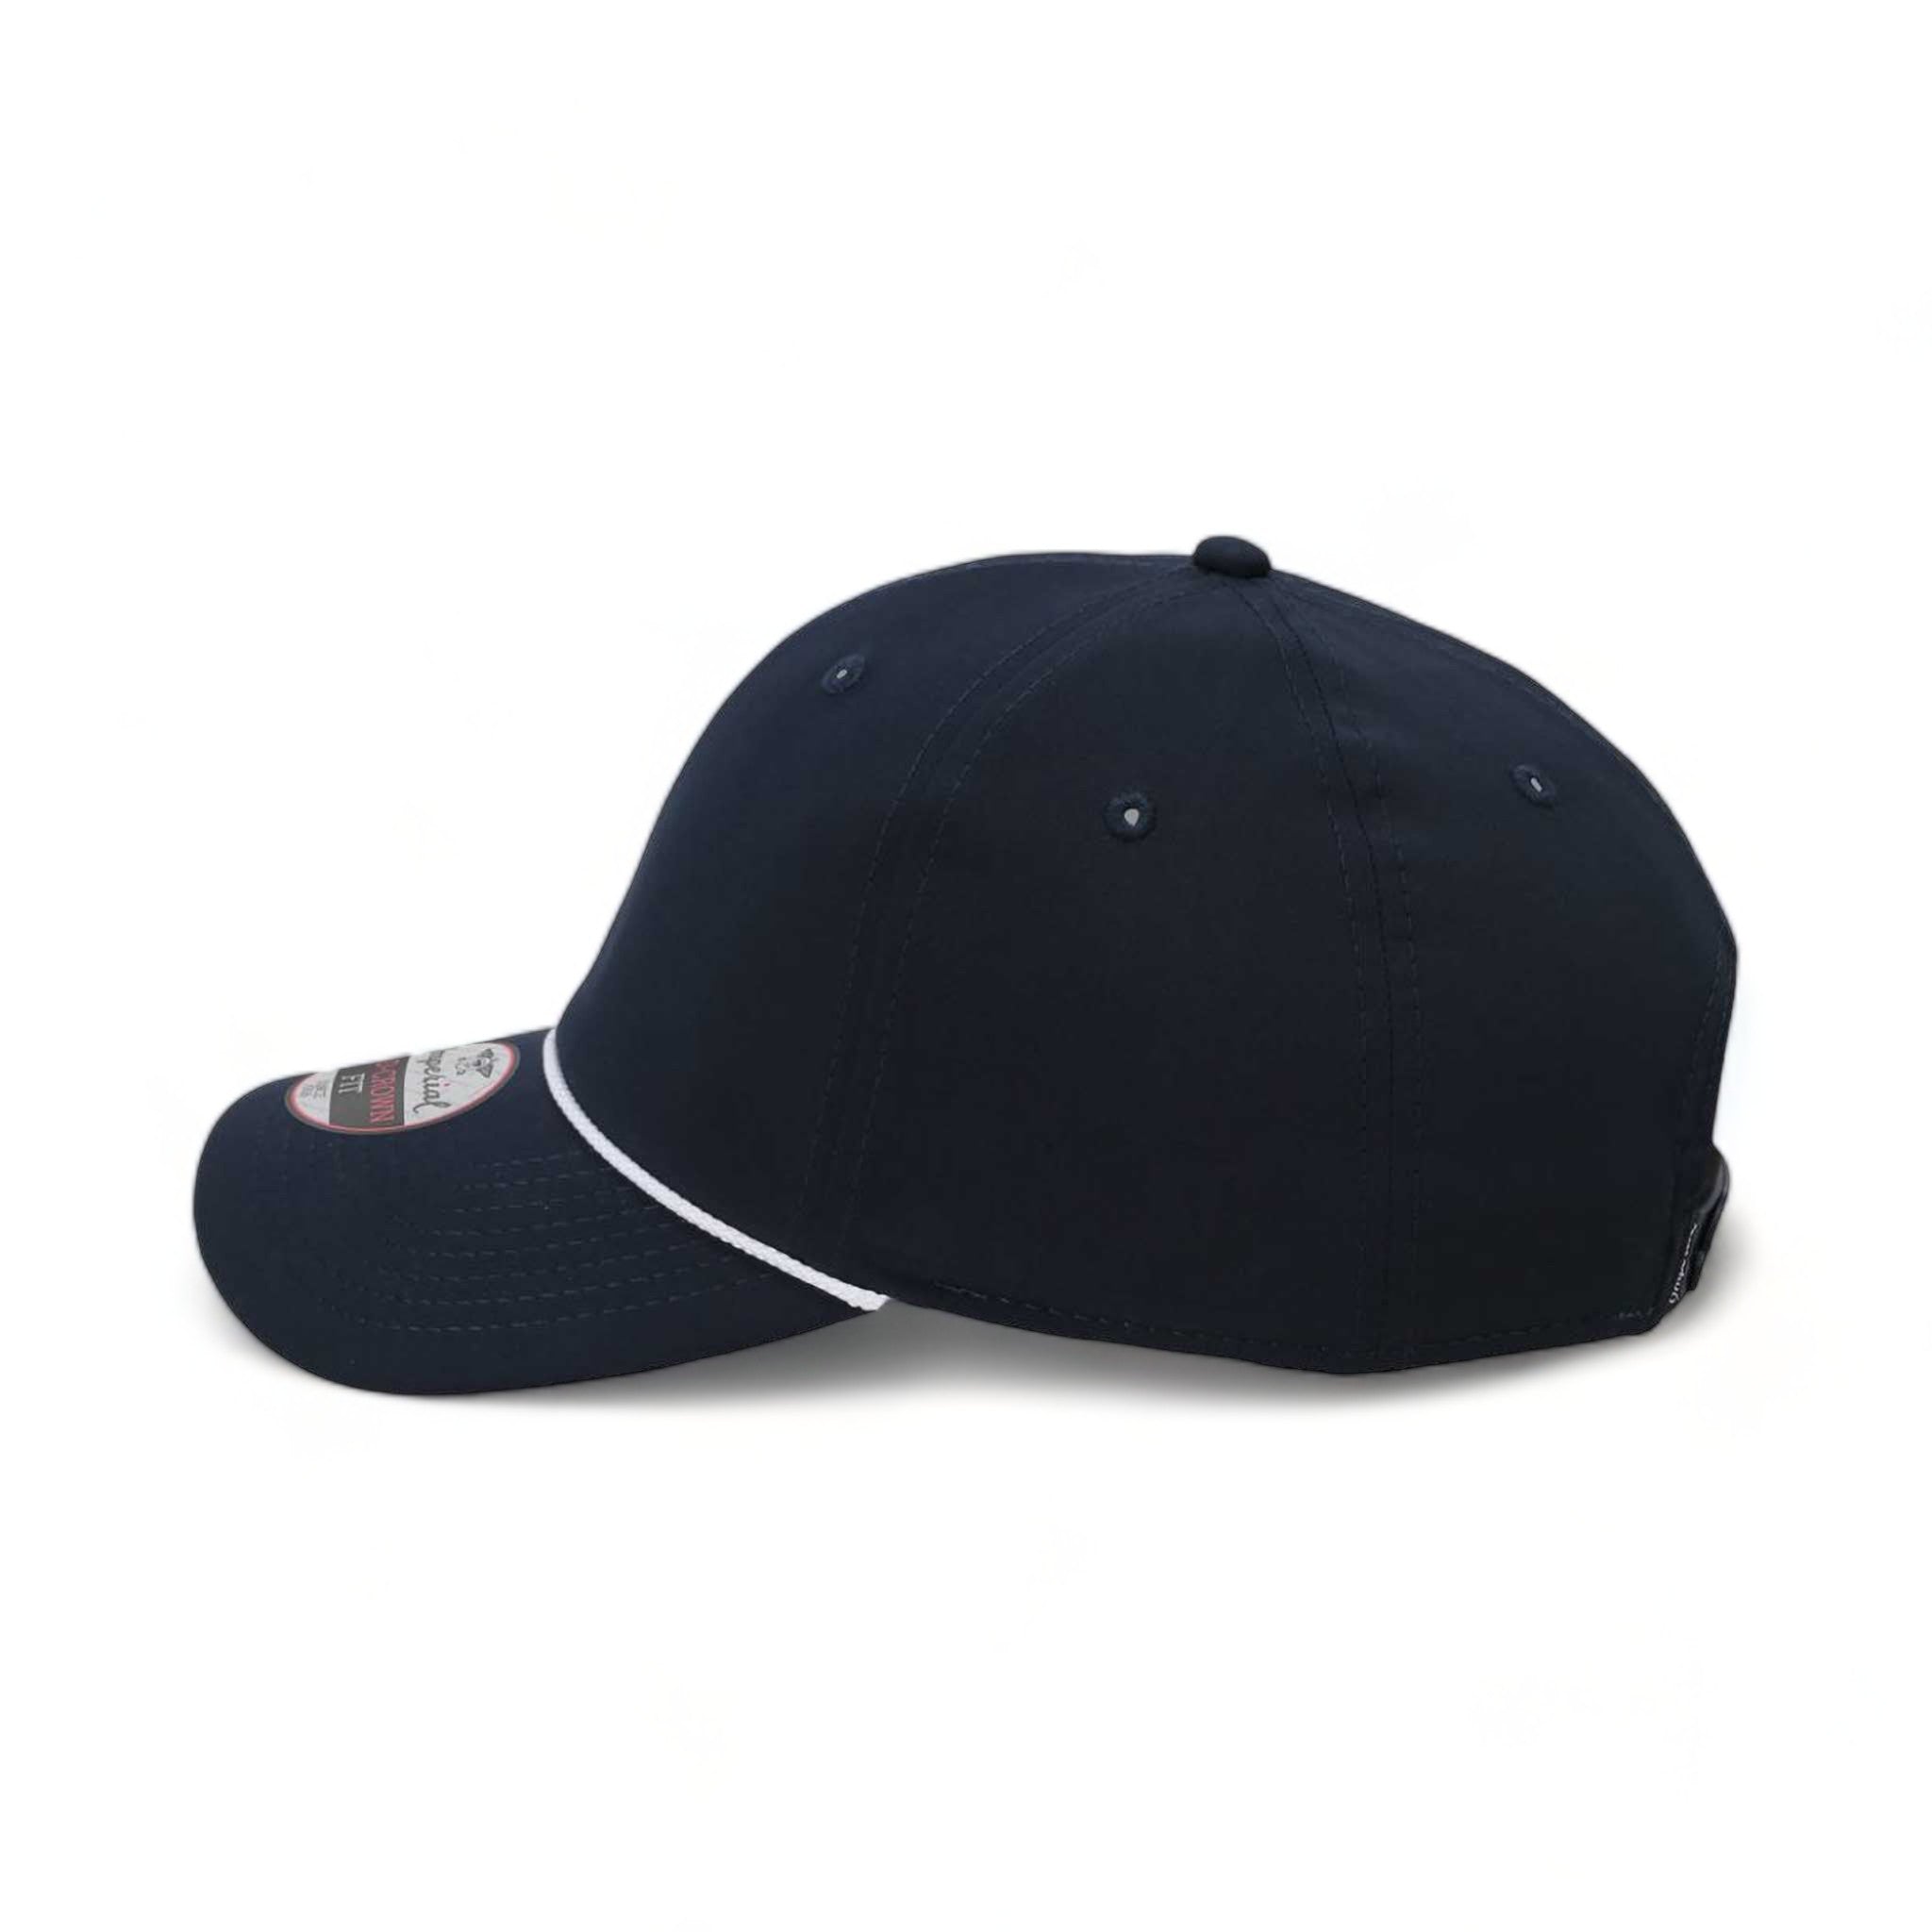 Side view of Imperial 7054 custom hat in navy and white